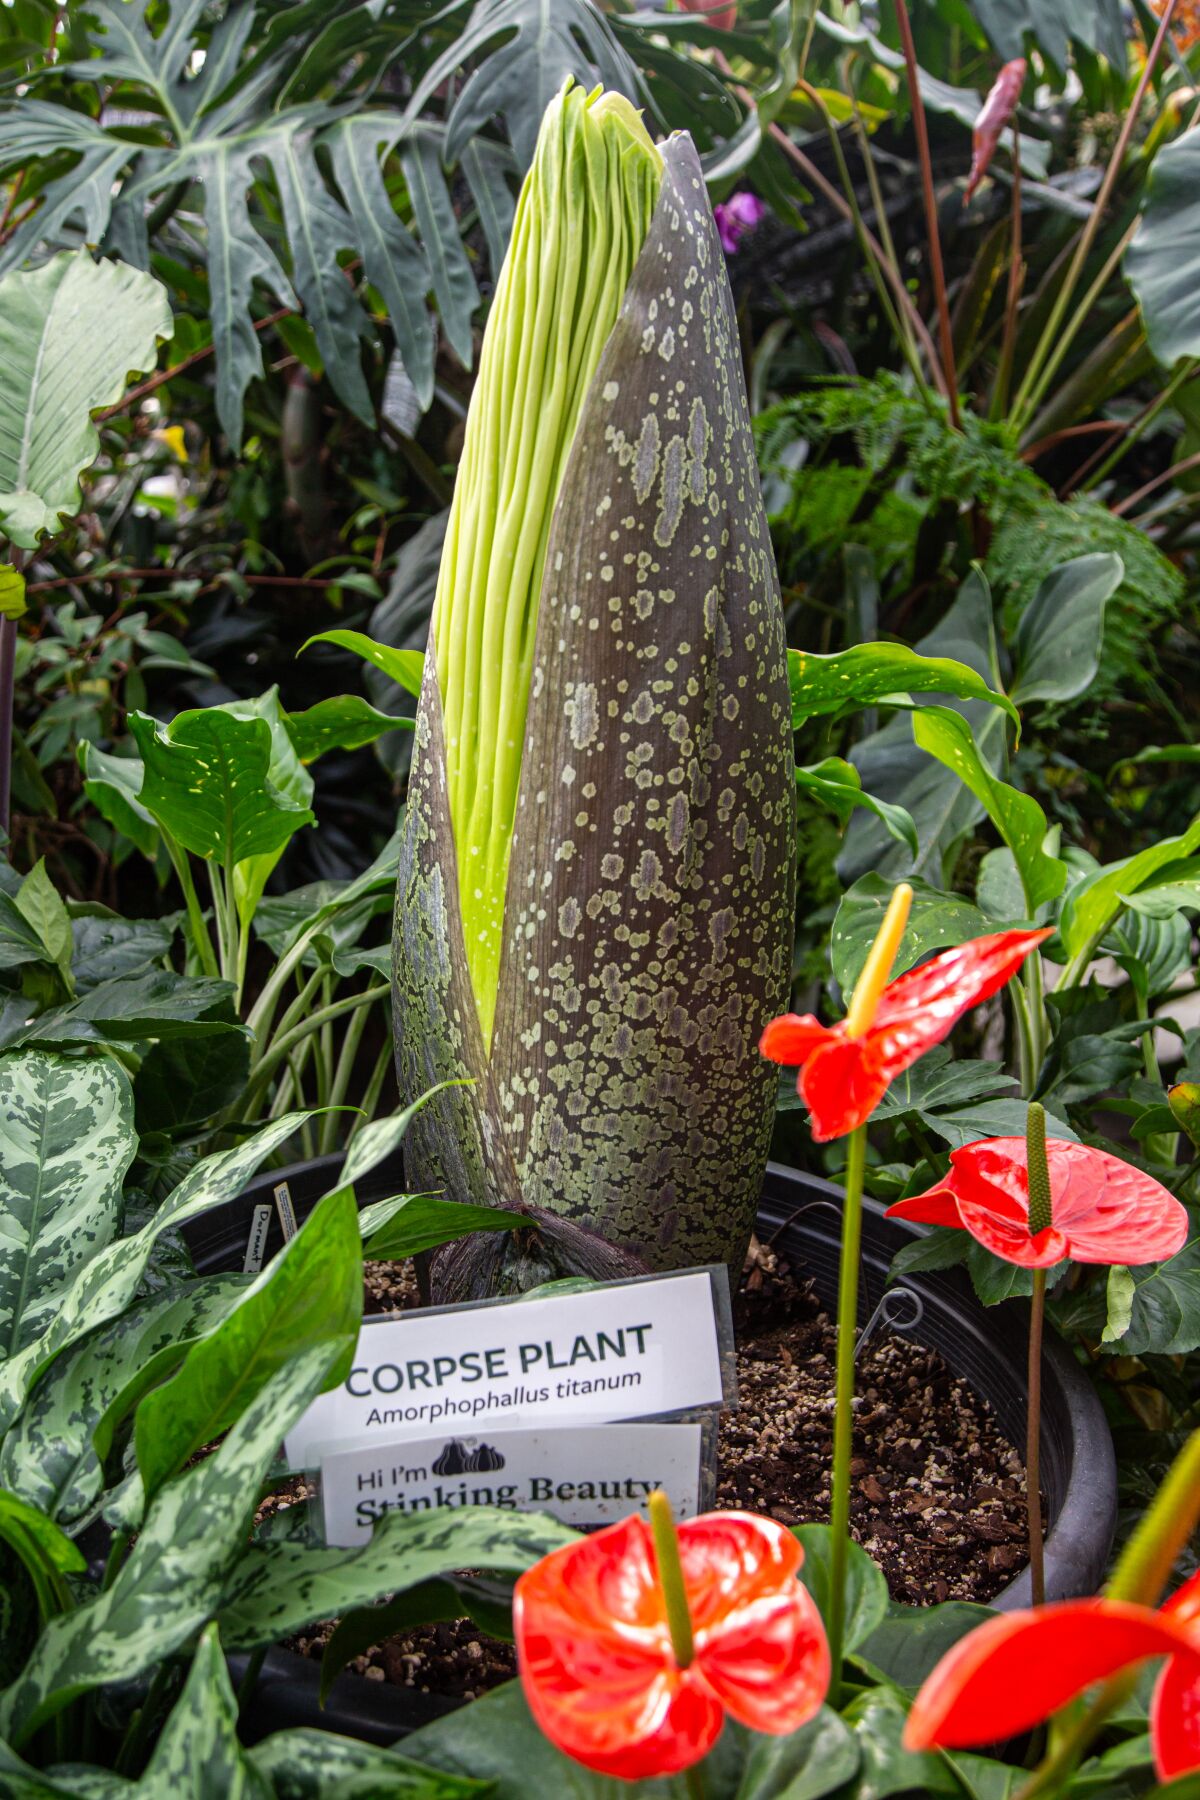 A second corpse plant begins its flowering process at San Diego Botanic Garden in Encinitas.